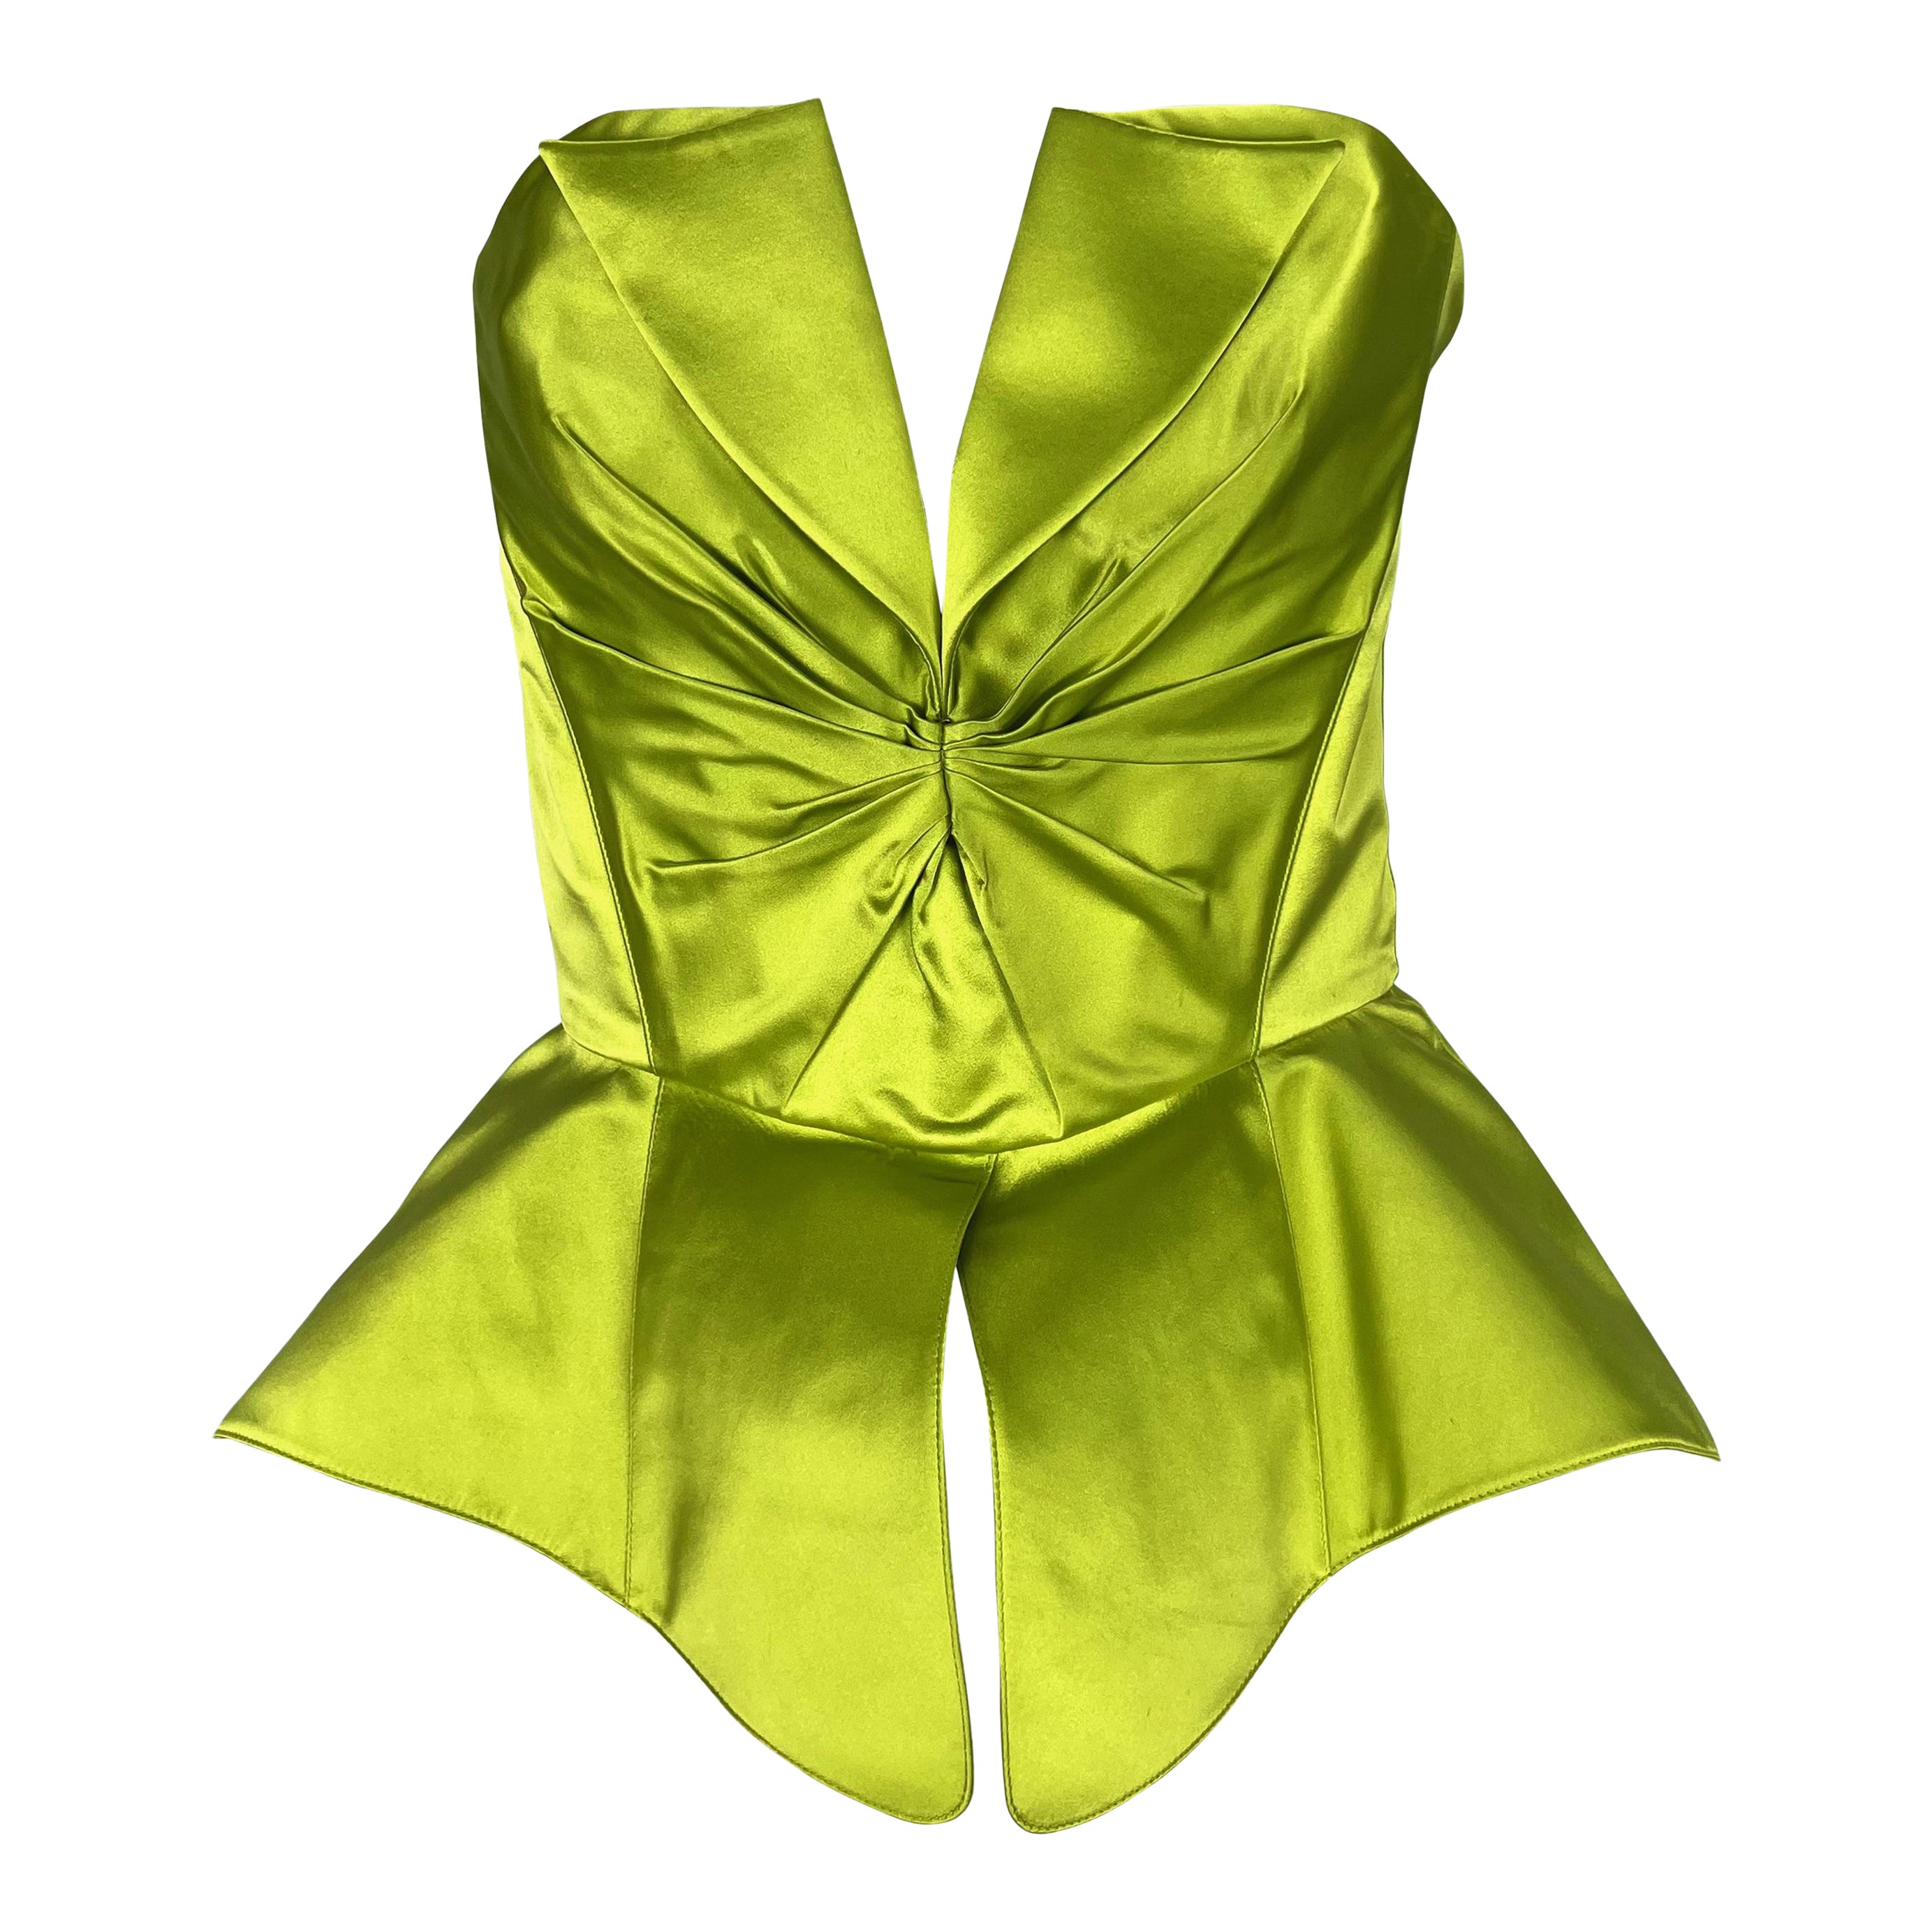 1995 Thierry Mugler Chartreuse Green Satin Sculptural Lace-Up Bustier Crop Top For Sale